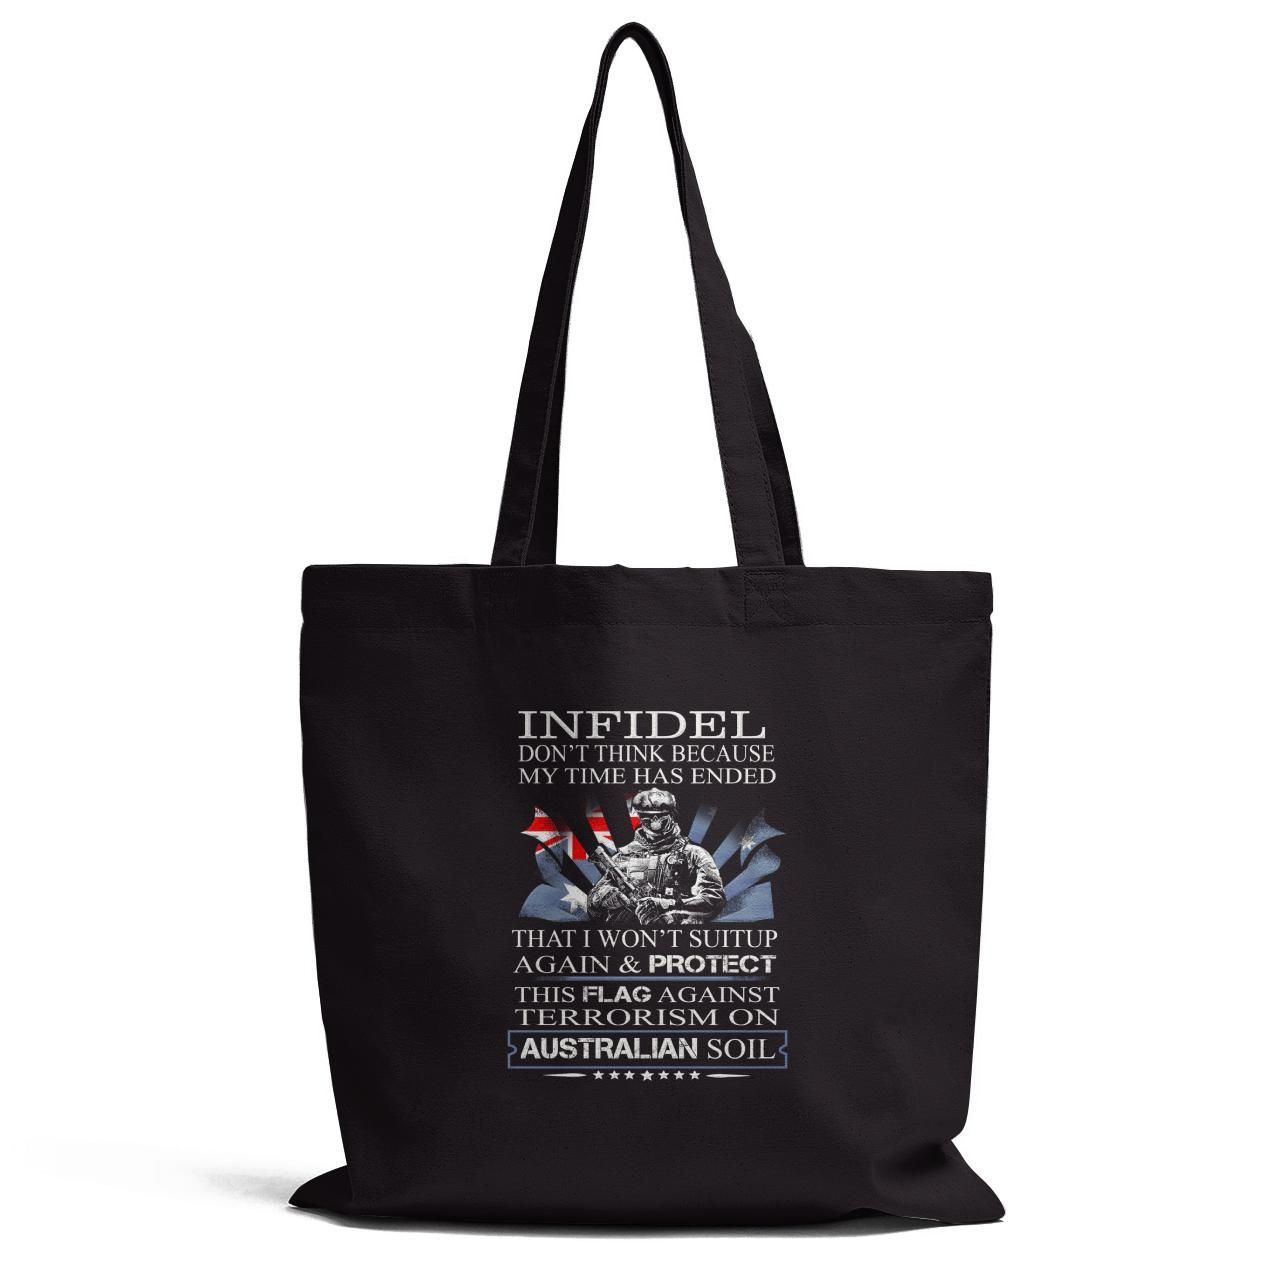 Infidel Dont Think Because My Time Has Ended Tote Bag